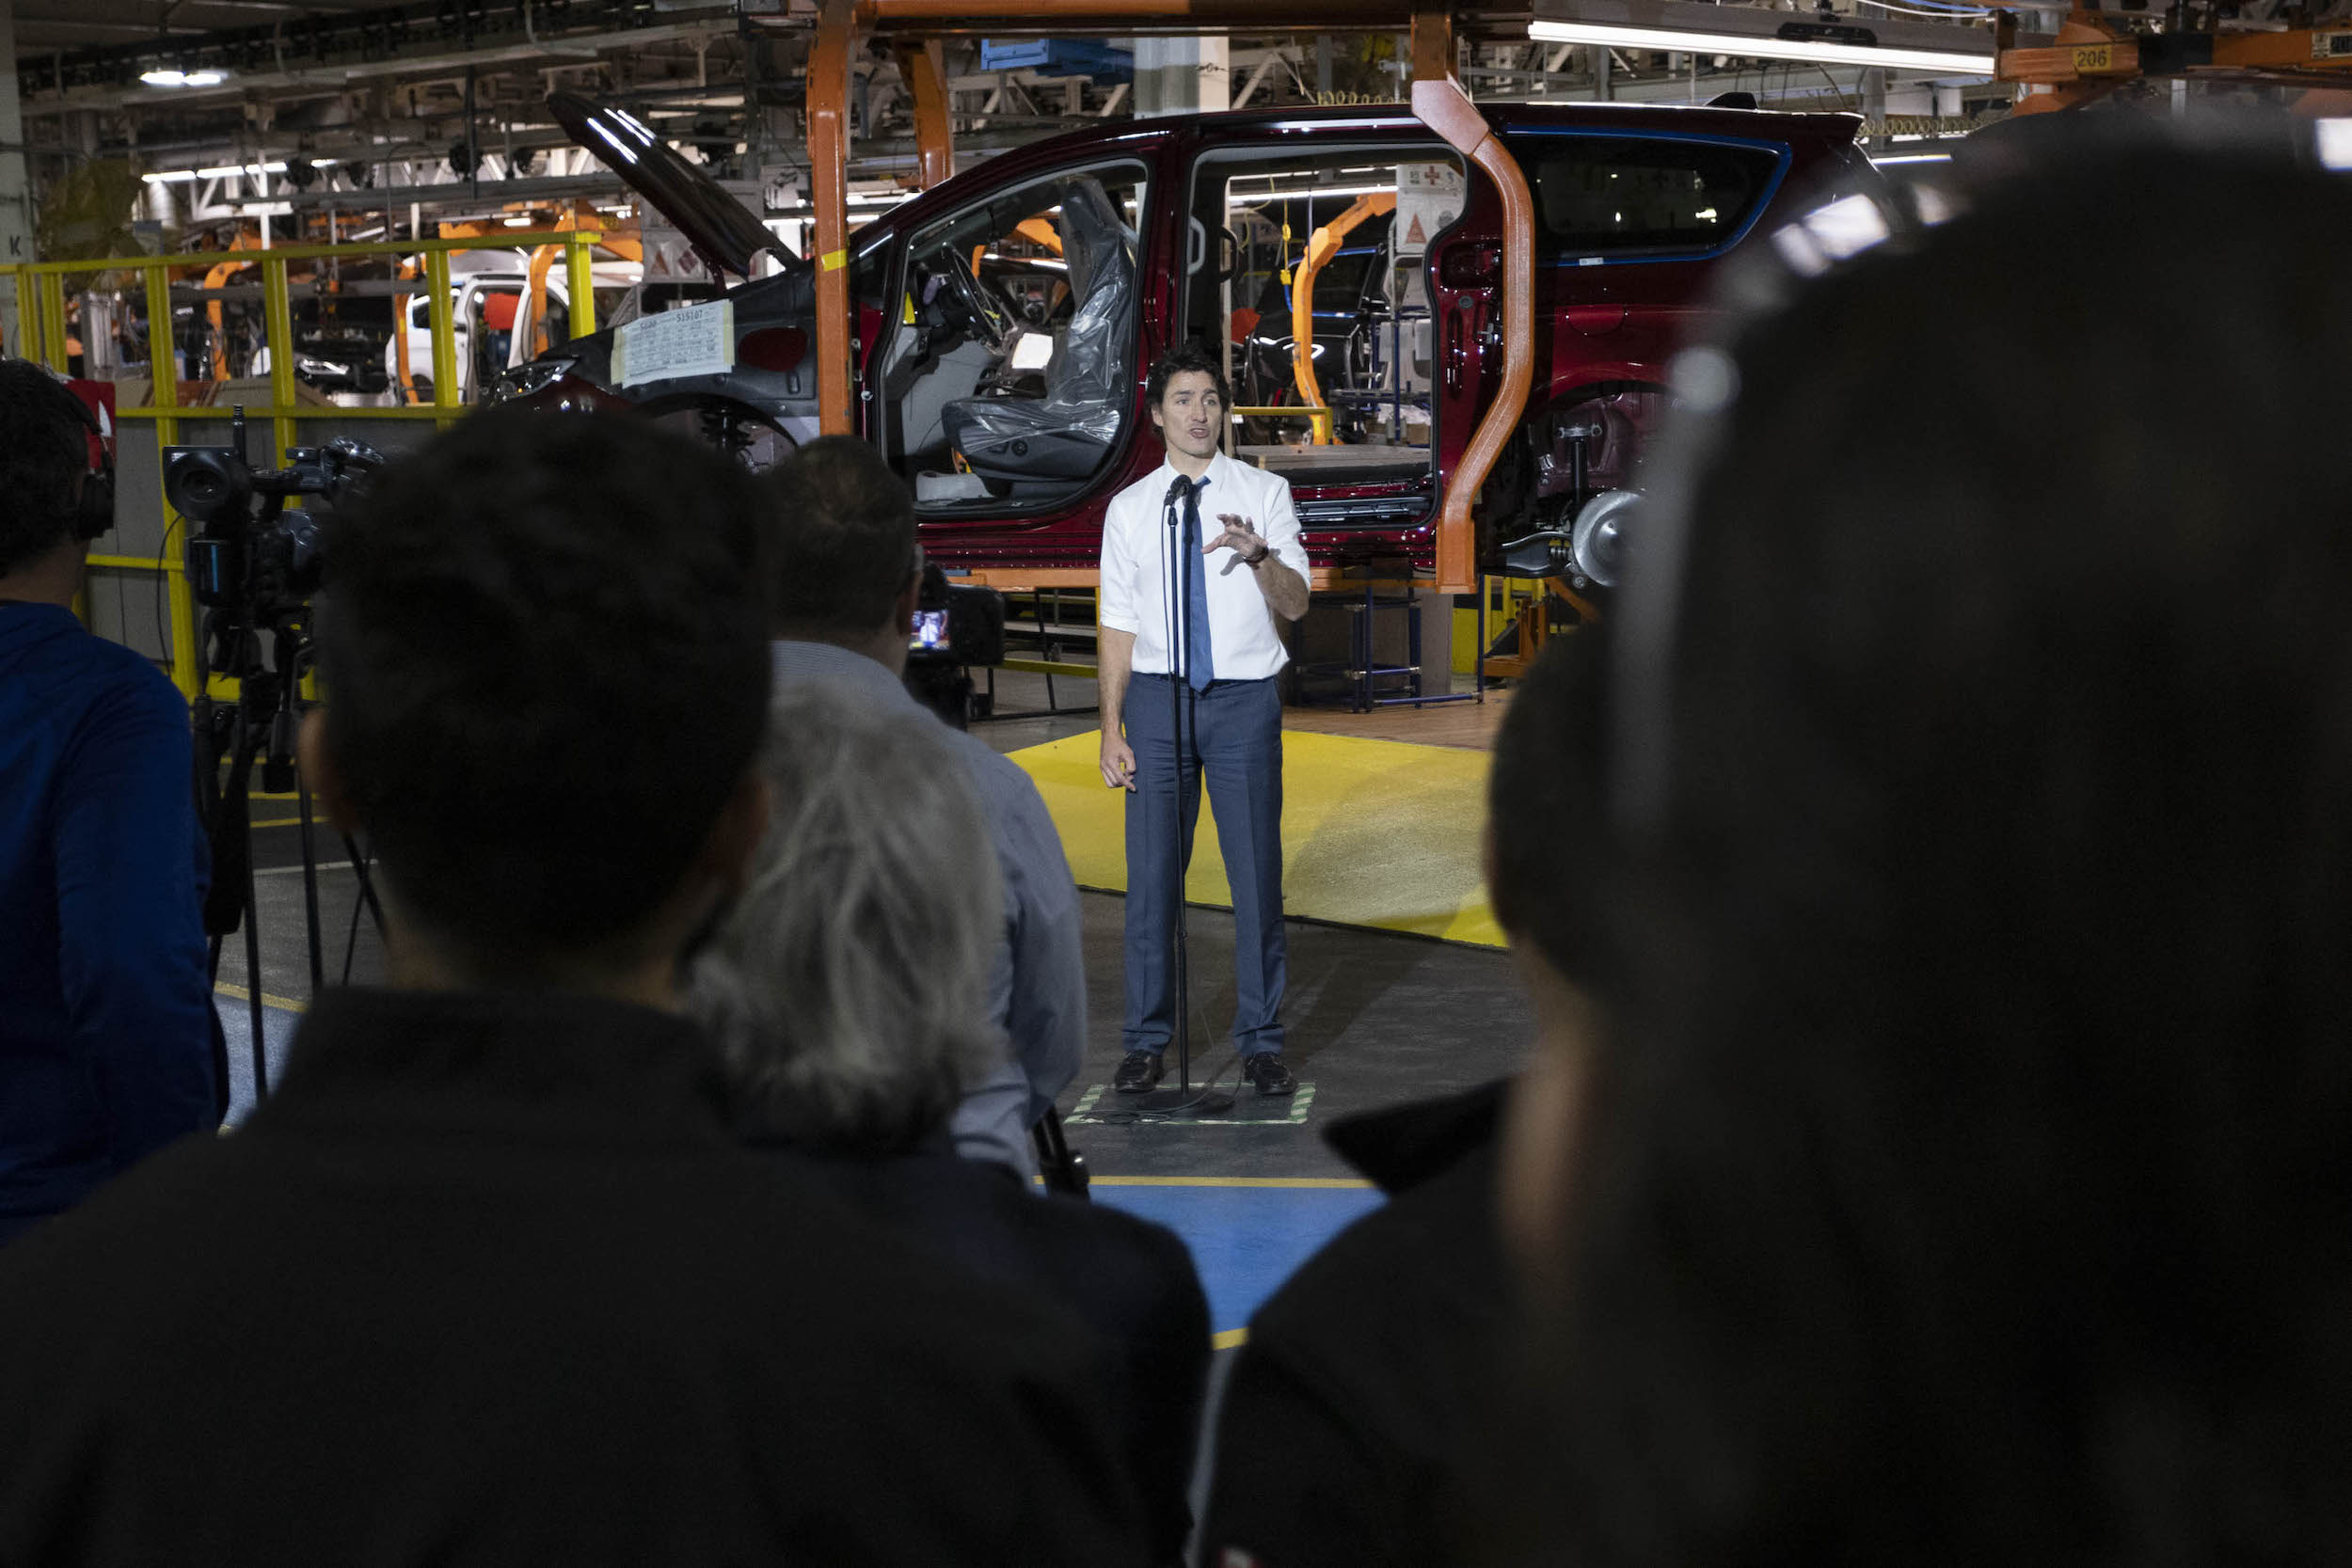 Prime Minister Justin Trudeau at the Stellantis plant in Windsor, Ont. in January. He and Ontario Premier Doug Ford both backed the opening of the company's first Canadian electric-vehicle battery manufacturing facility in the city. Photo: Nicole Osborne / The Canadian Press